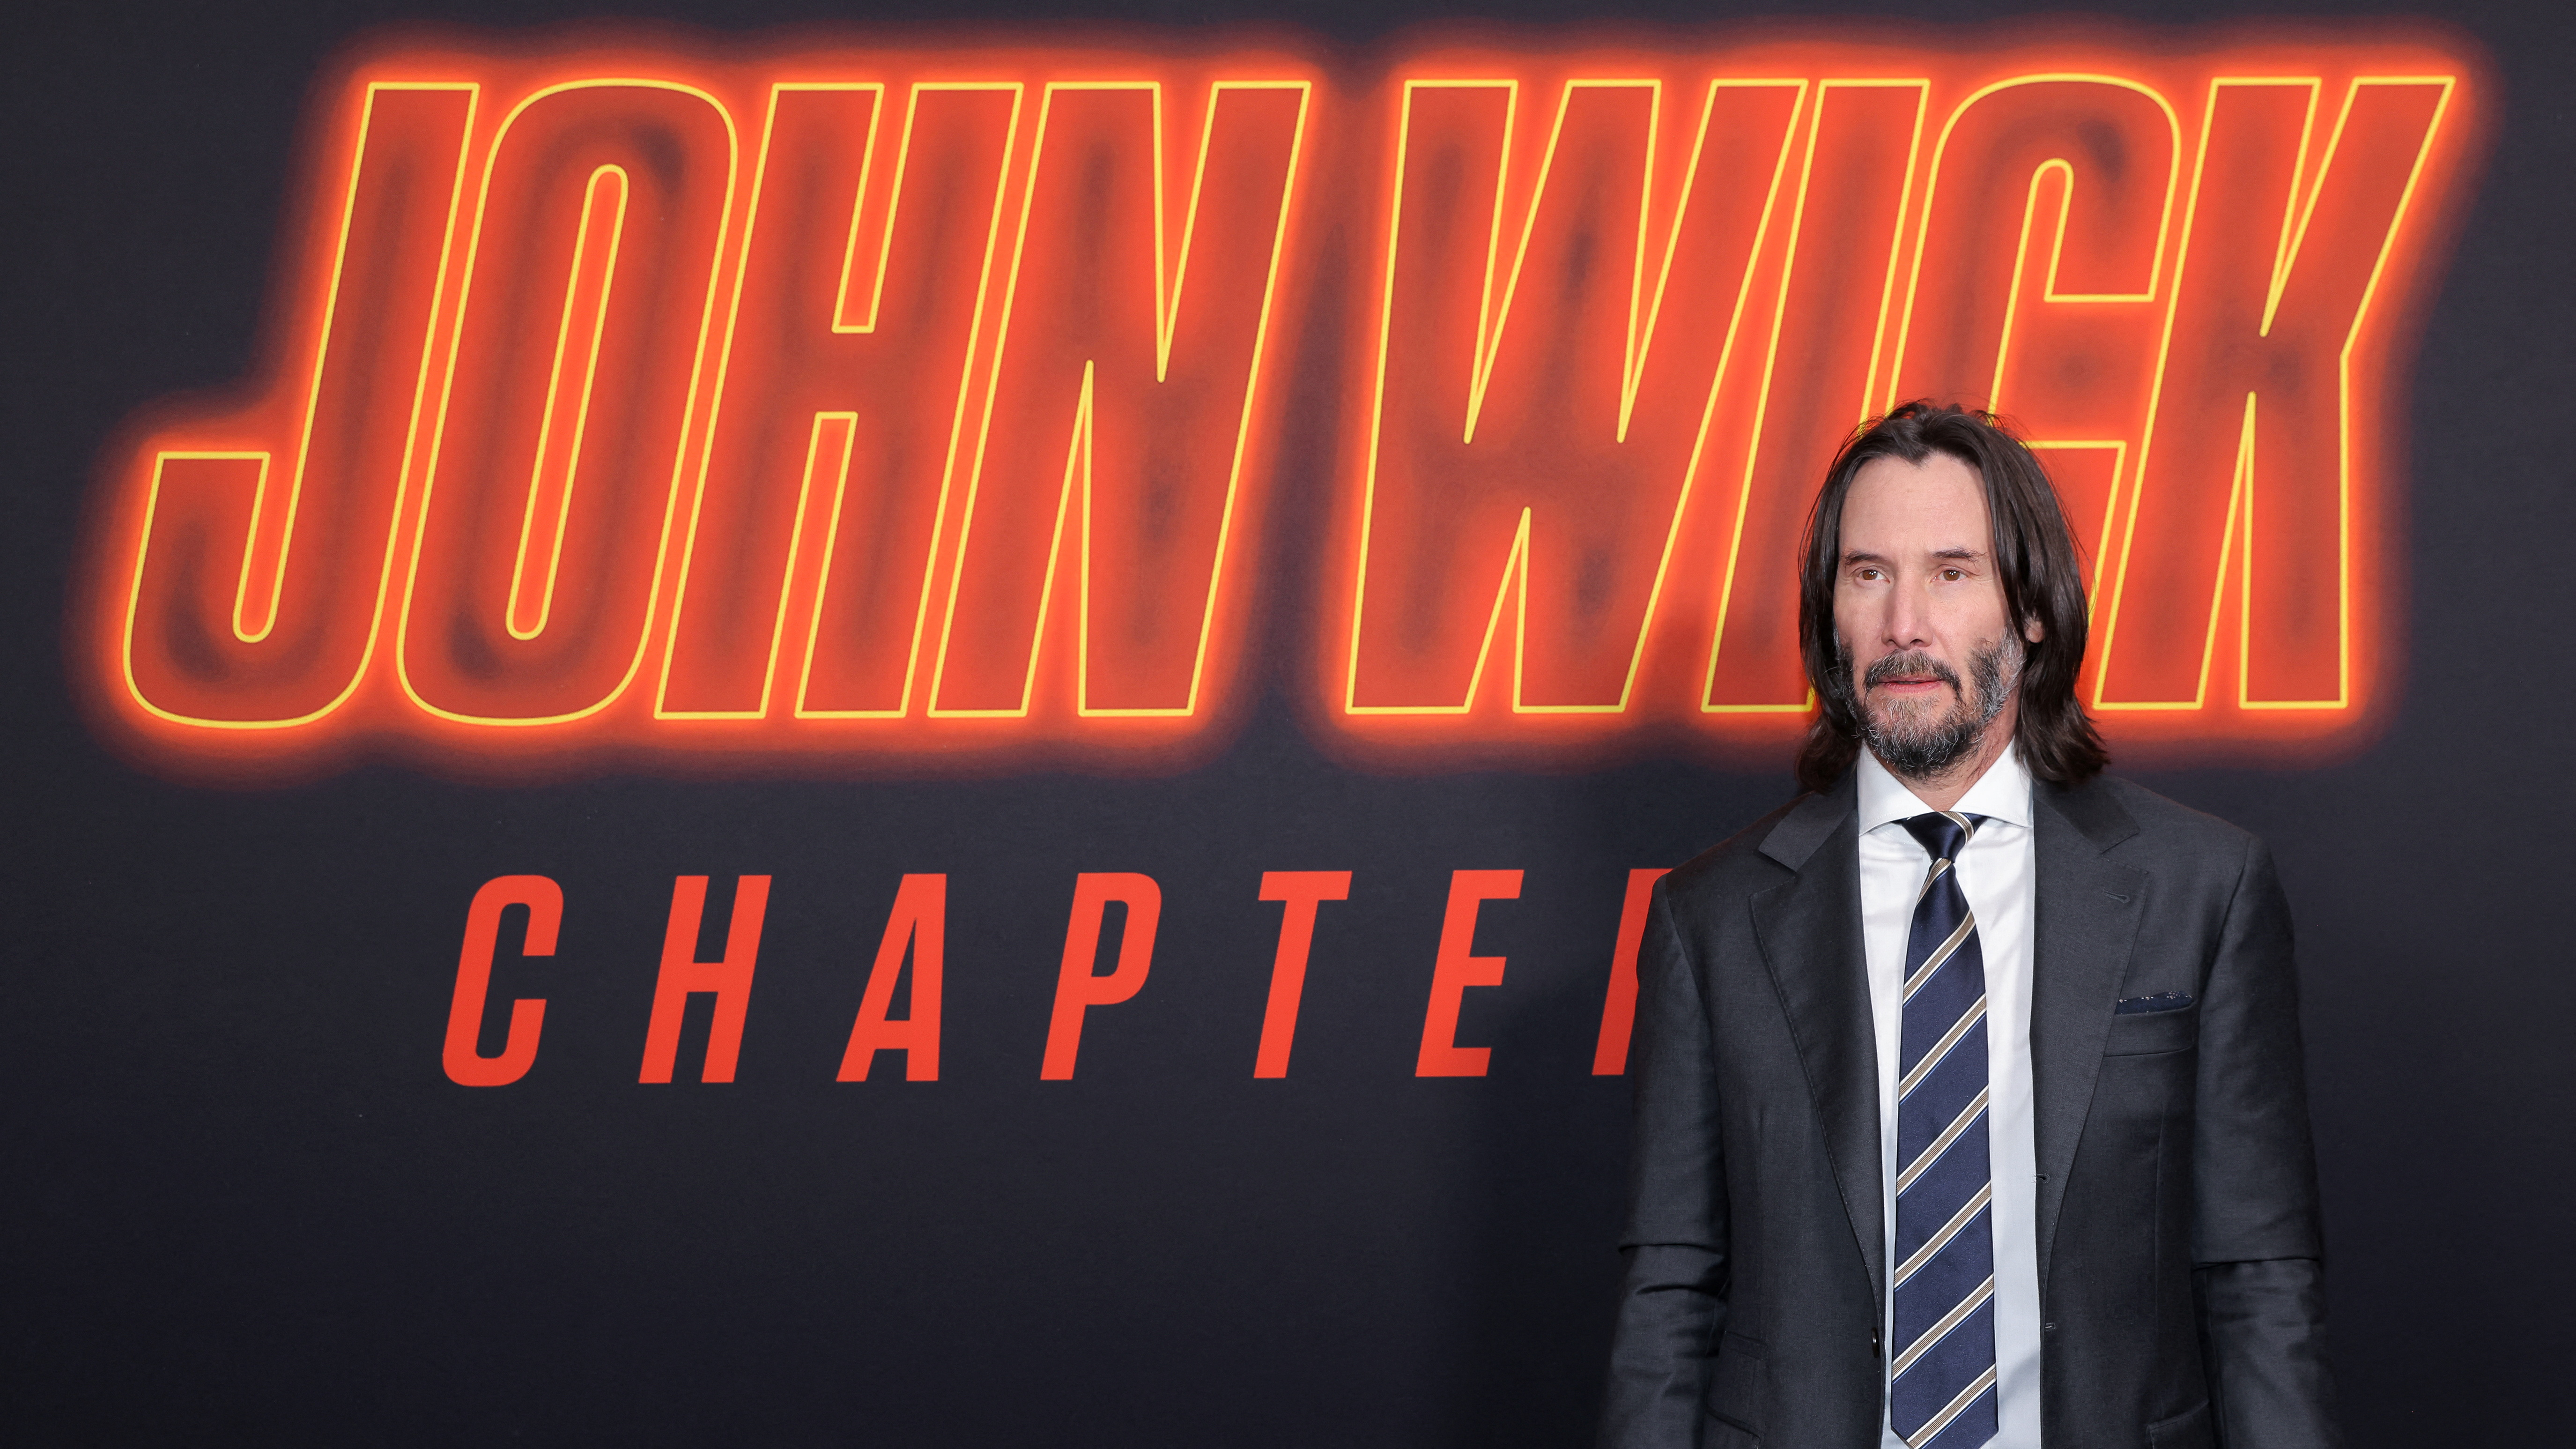 Keanu Reeves attends a screening of "John Wick: Chapter 4" in New York City, U.S., March 15, 2023. REUTERS/Andrew Kelly